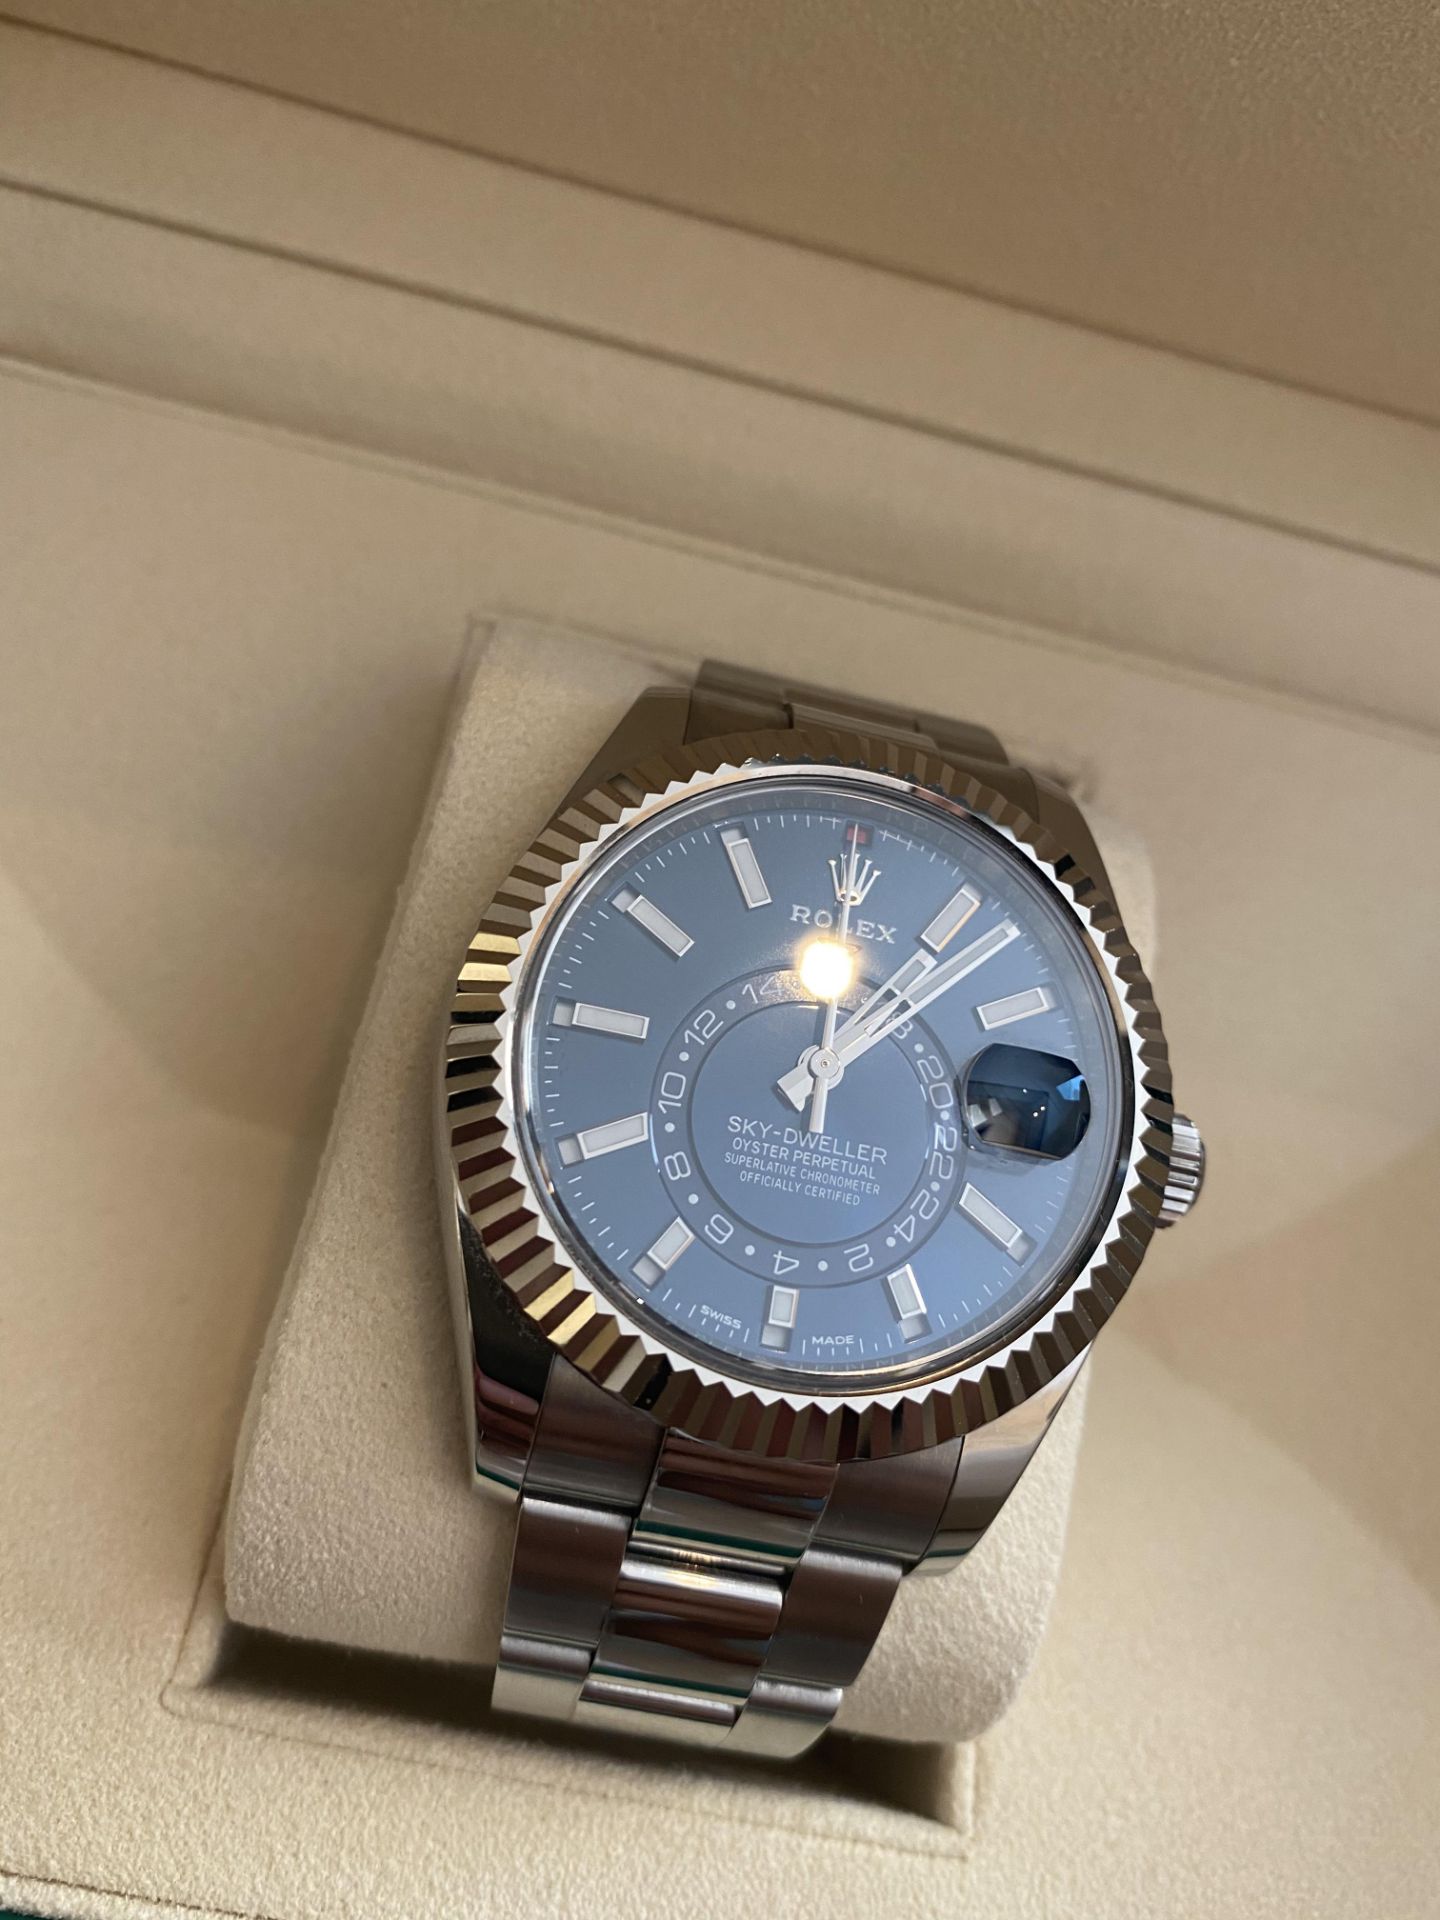 2018 ROLEX SKY DWELLER OYSTER 42MM OYSTERSTEEL & WHITE GOLD **BLUE DIAL** - Image 6 of 12